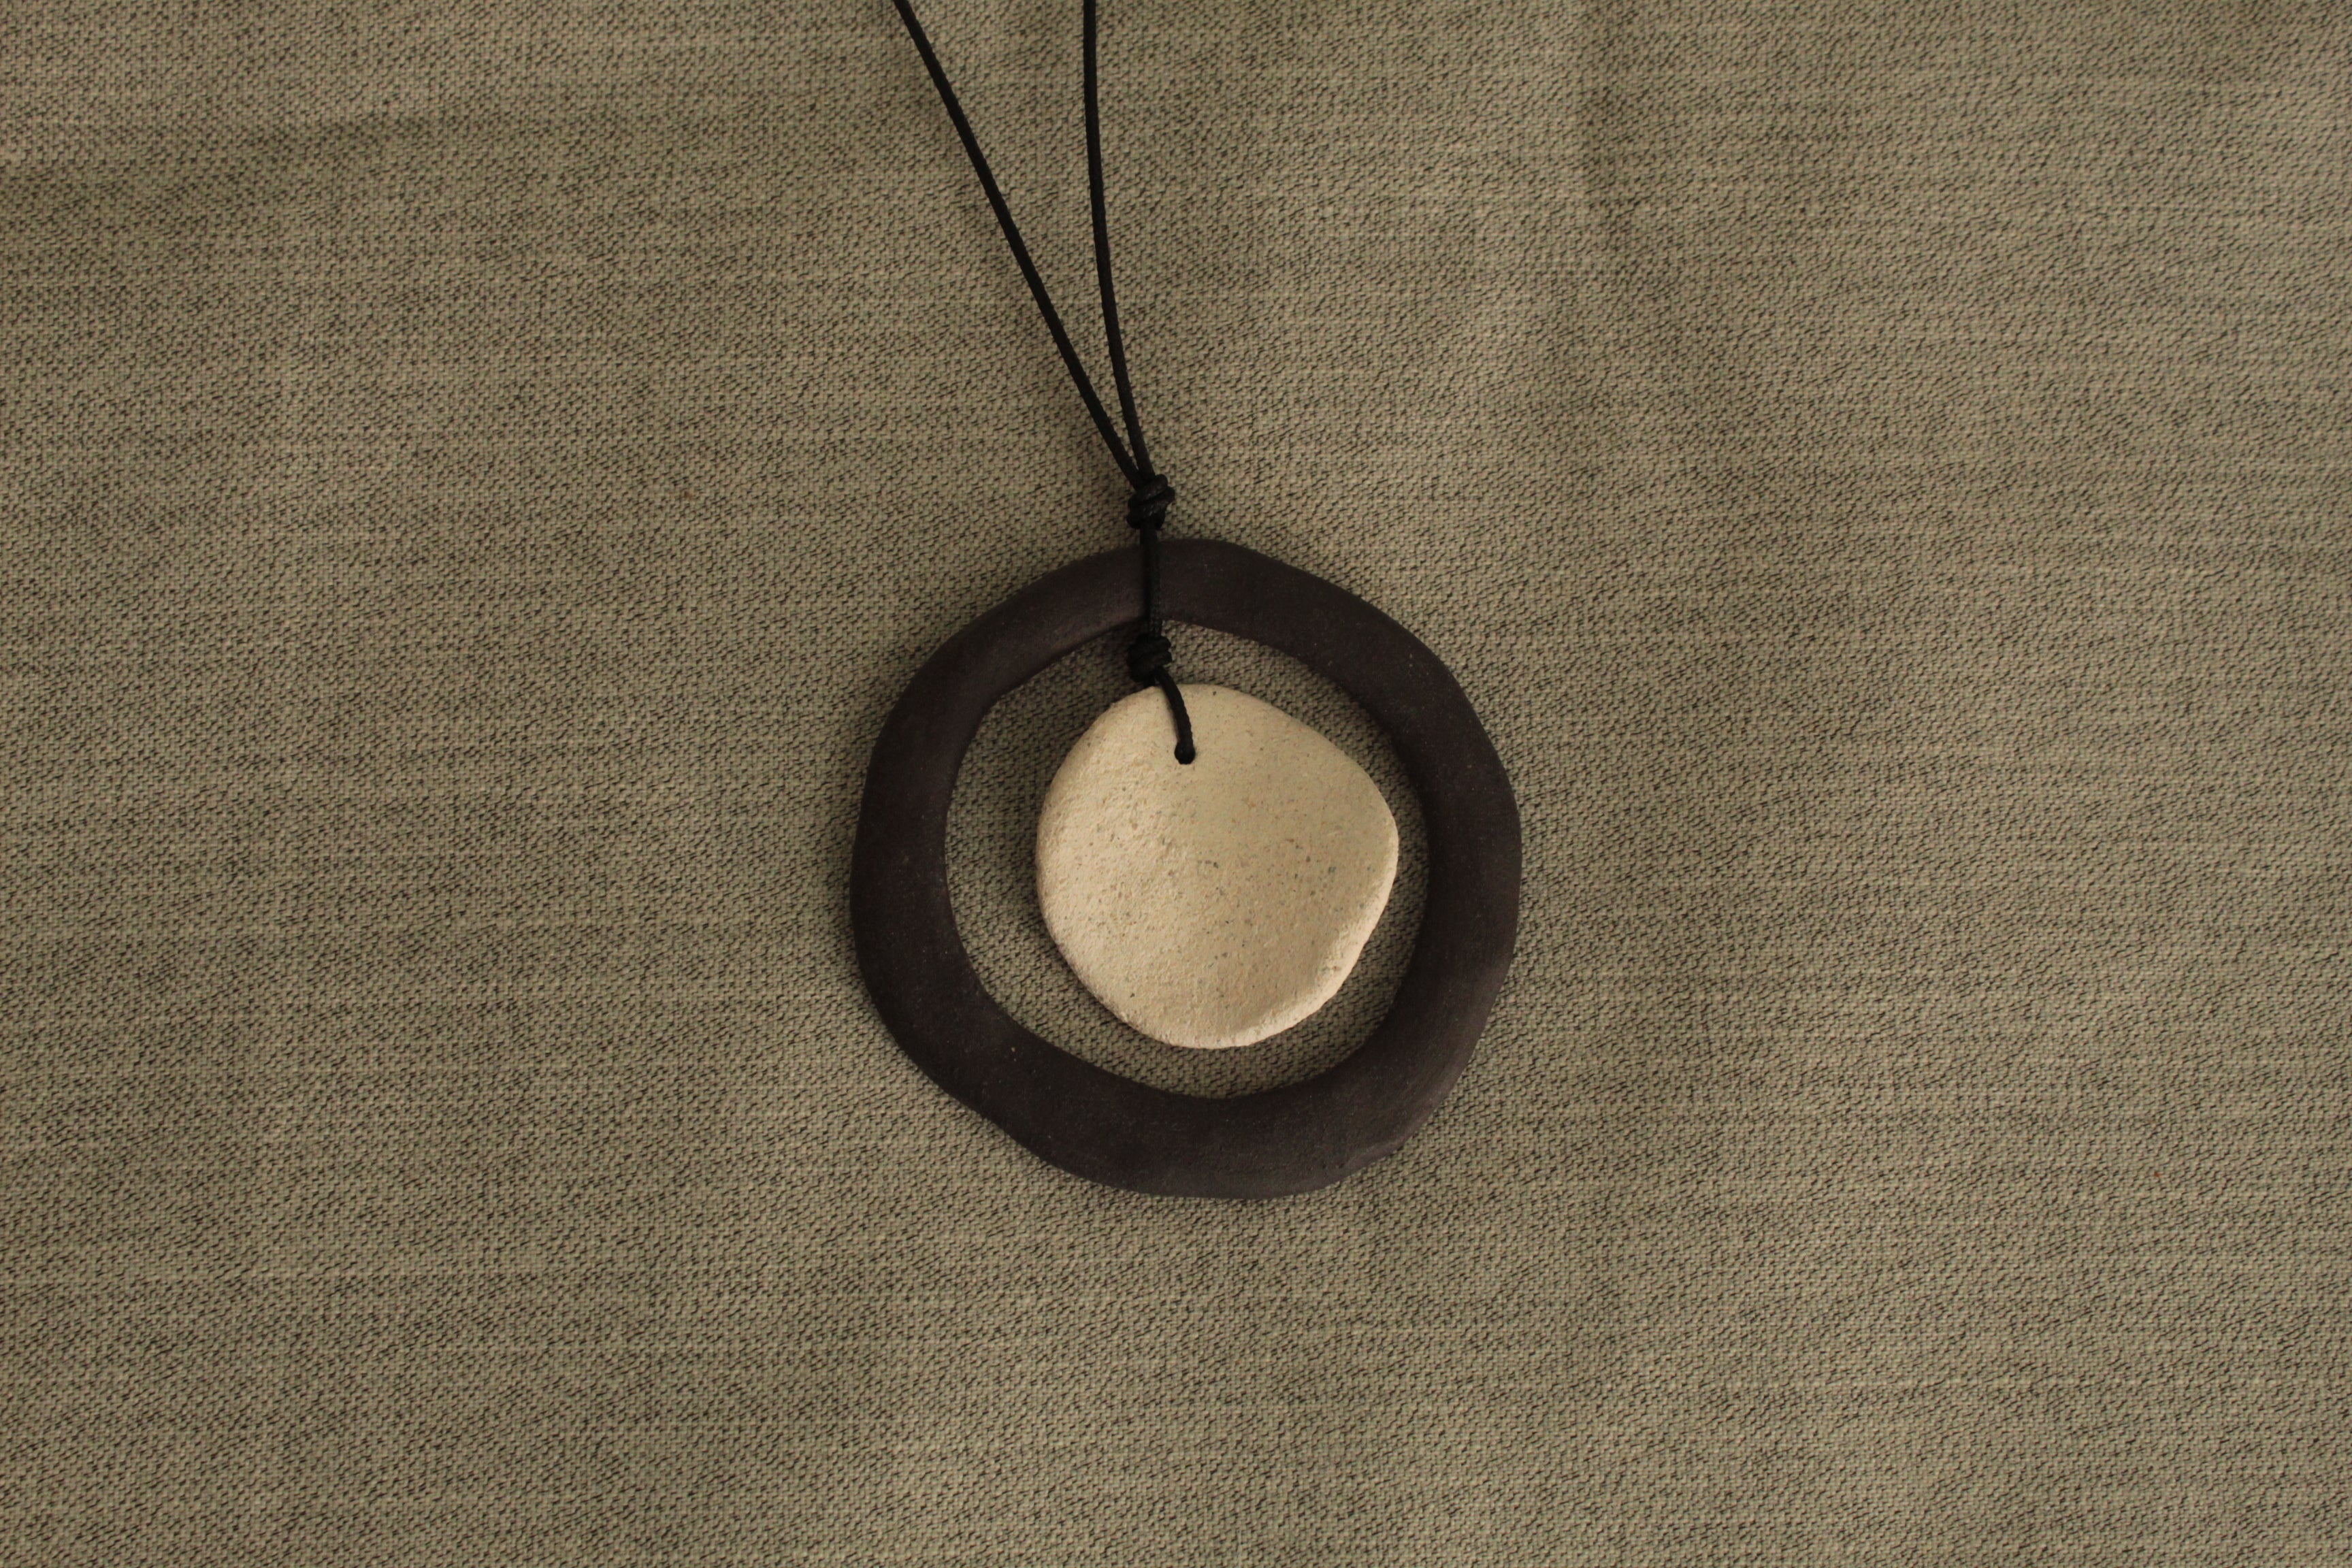 Black hoop and white circle necklace